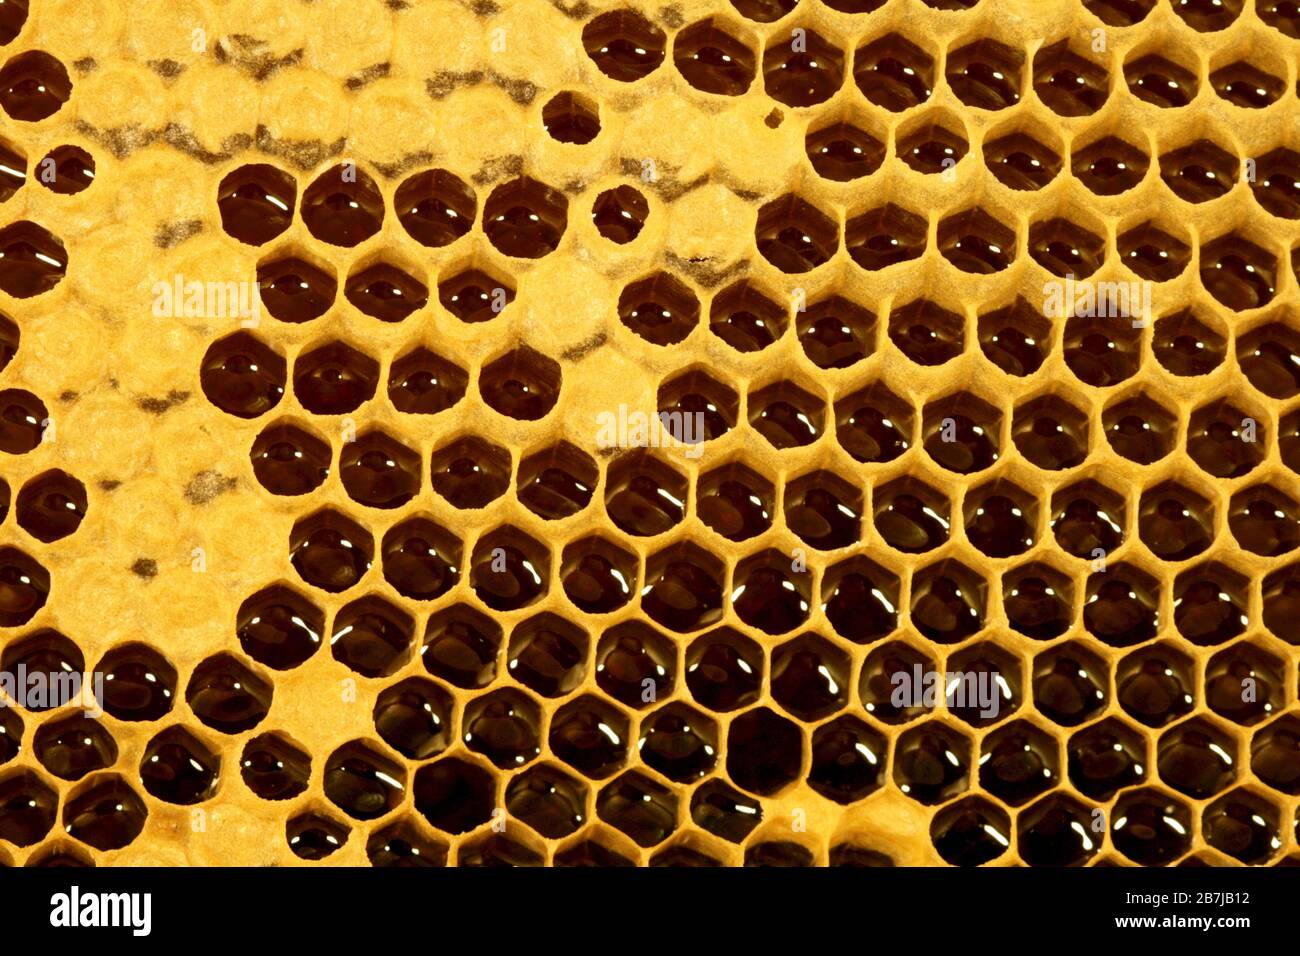 Fresh Honey II: closeup of fresh mature honey filled in the partly covered cells of a honeycomb Stock Photo